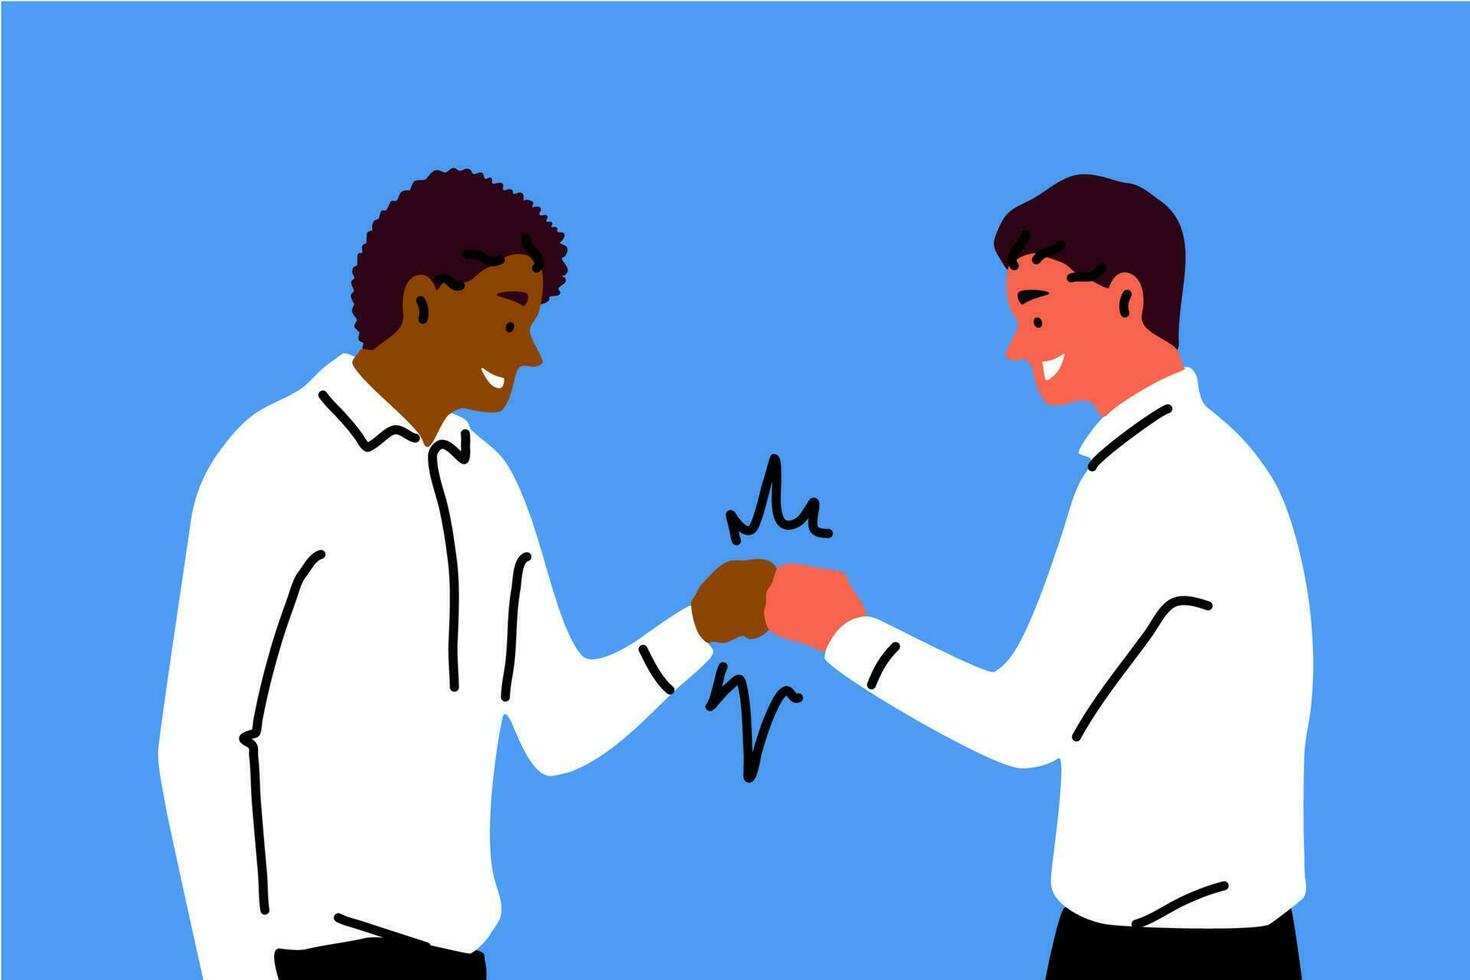 Friendship, greeting, congatulation, success concept. Young happy smiling african american man cartoon character greets old friend congratulating with victory. Goal achievement and friendly meeting. vector